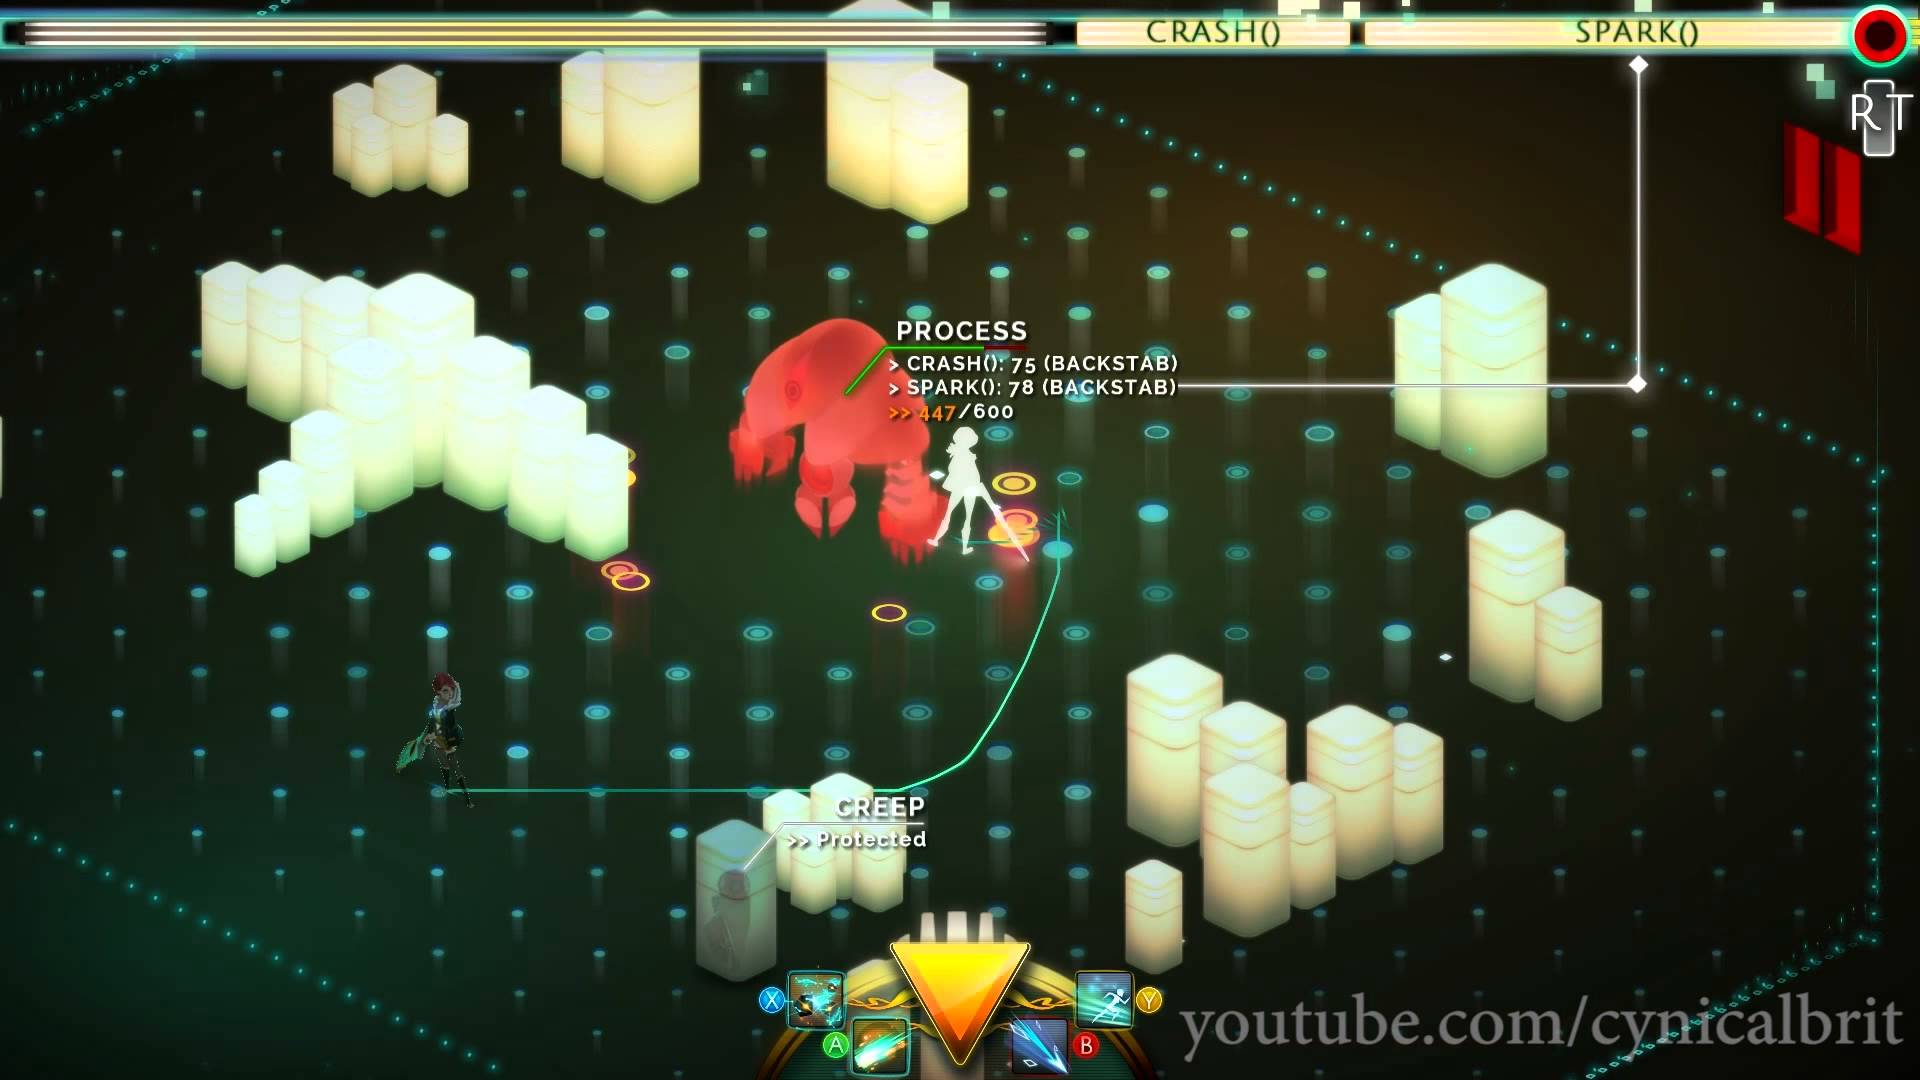 HD desktop wallpaper featuring a scene from the video game Transistor with gameplay elements displayed.